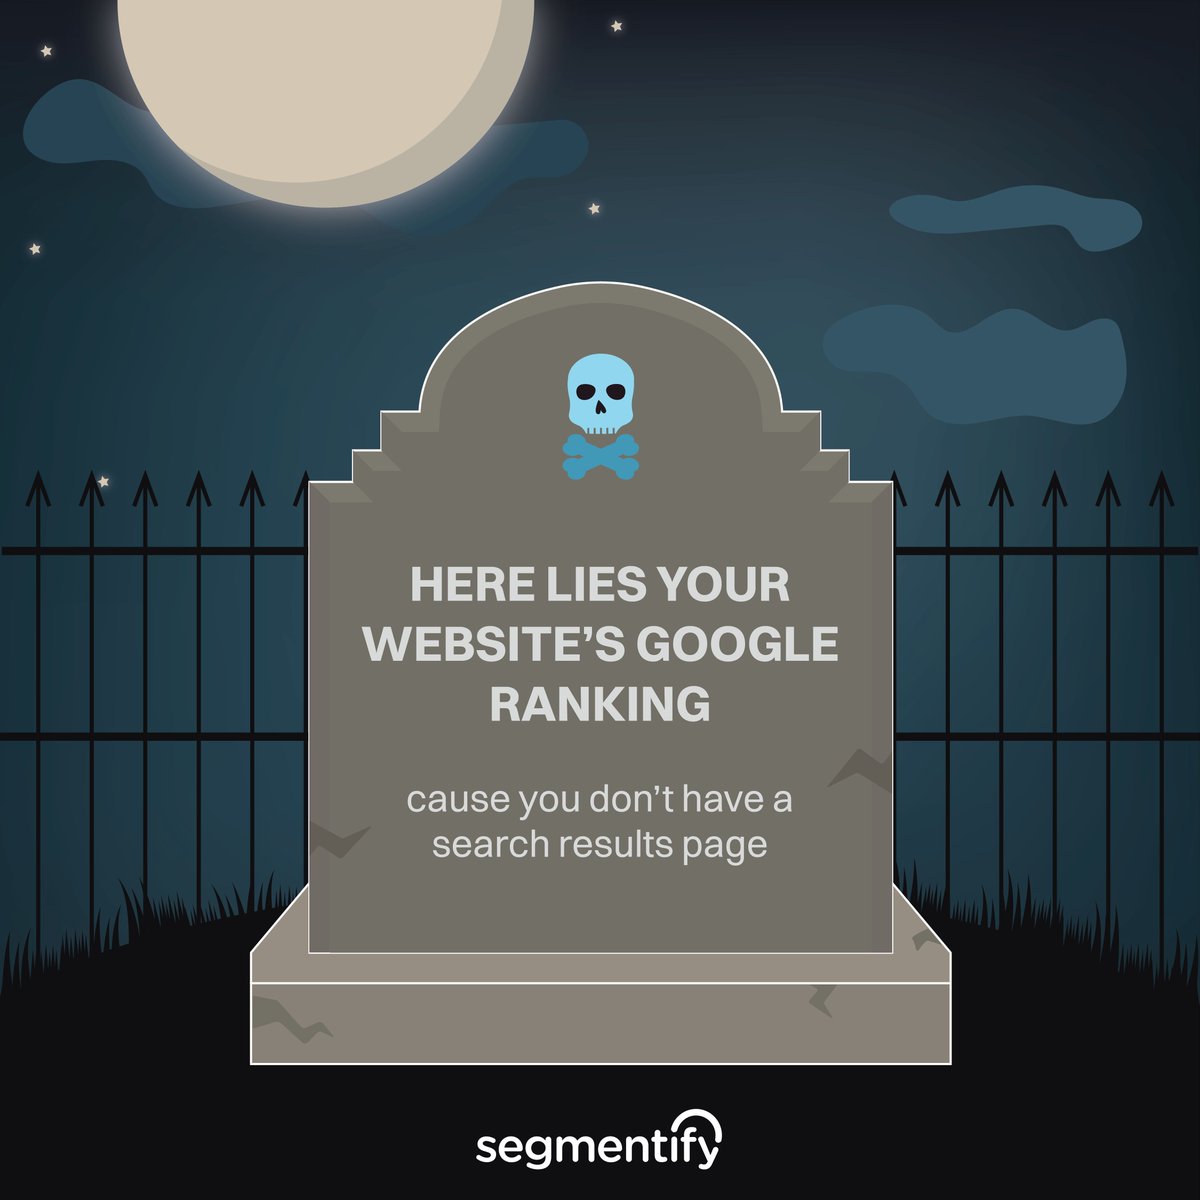 Ding dong! Your search engine ranking is dead 👻👻

It’s come to our attention that A LOT of websites are operating WITHOUT any search results pages :(  That's:

👎 Poor #websitemanagement
💢 Horrible UX
📉 Terrible #SEOstrategy

#martech #digitalmarketing #searchmarketing